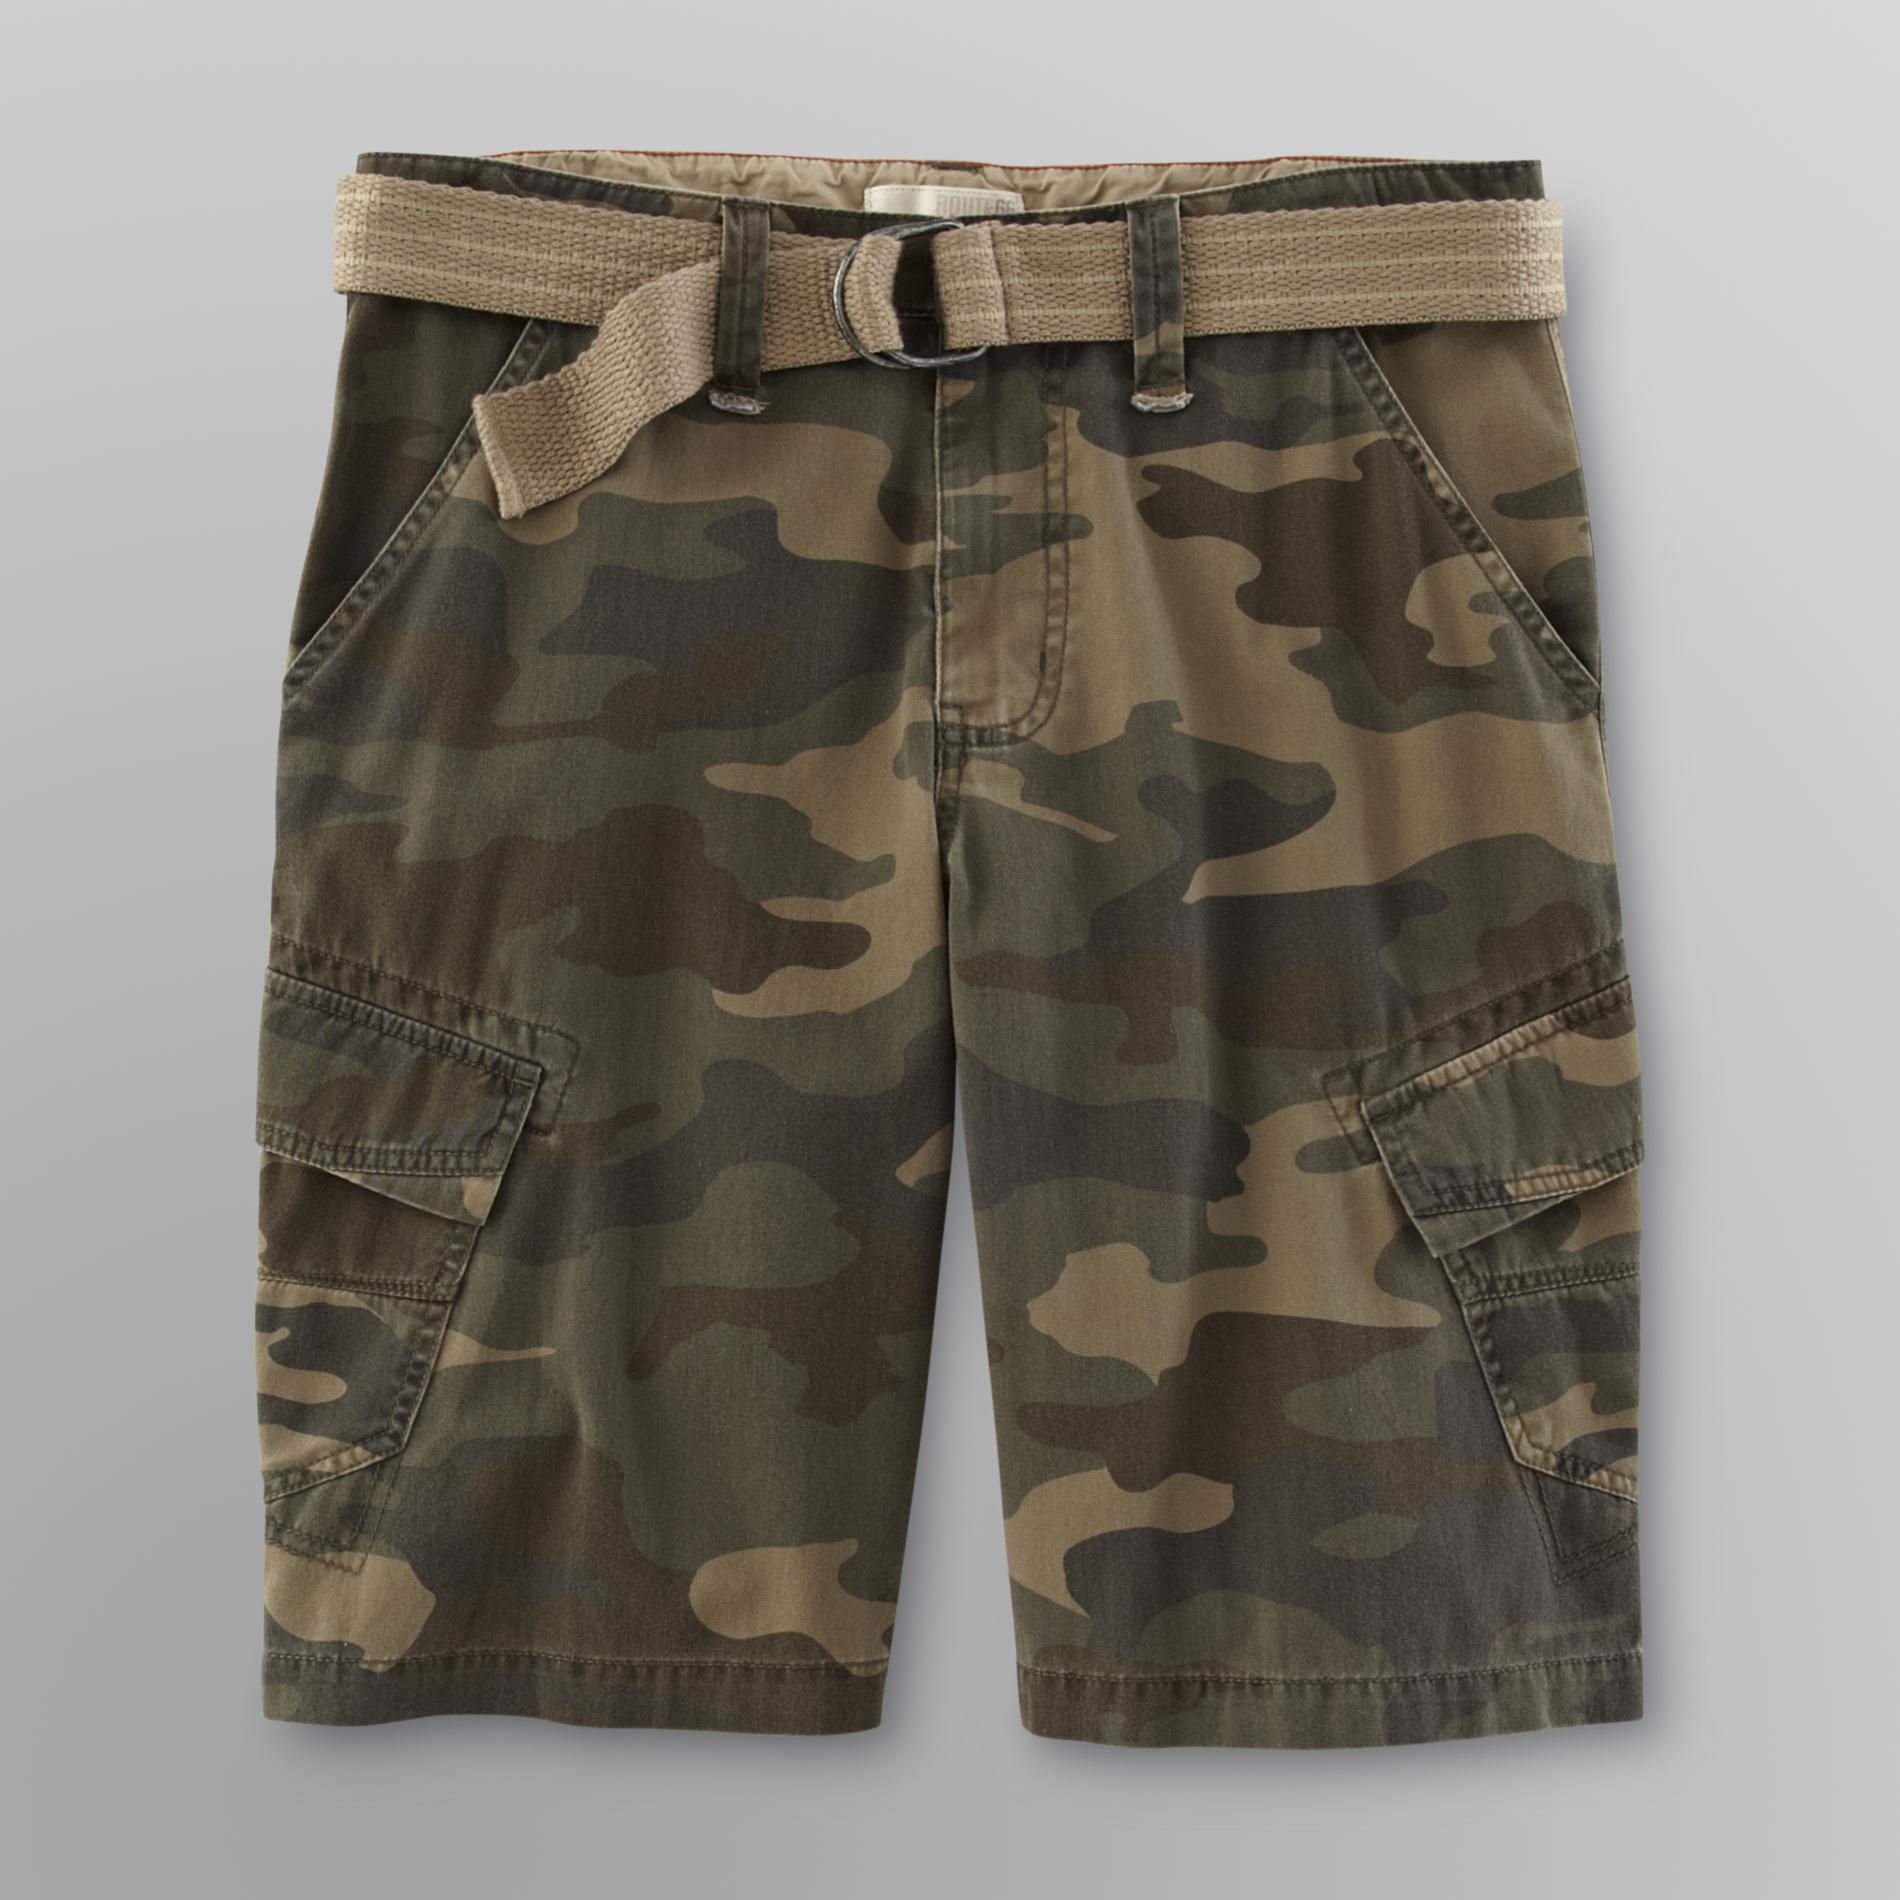 Route 66 Young Men's Cargo Shorts & Belt - Camouflage